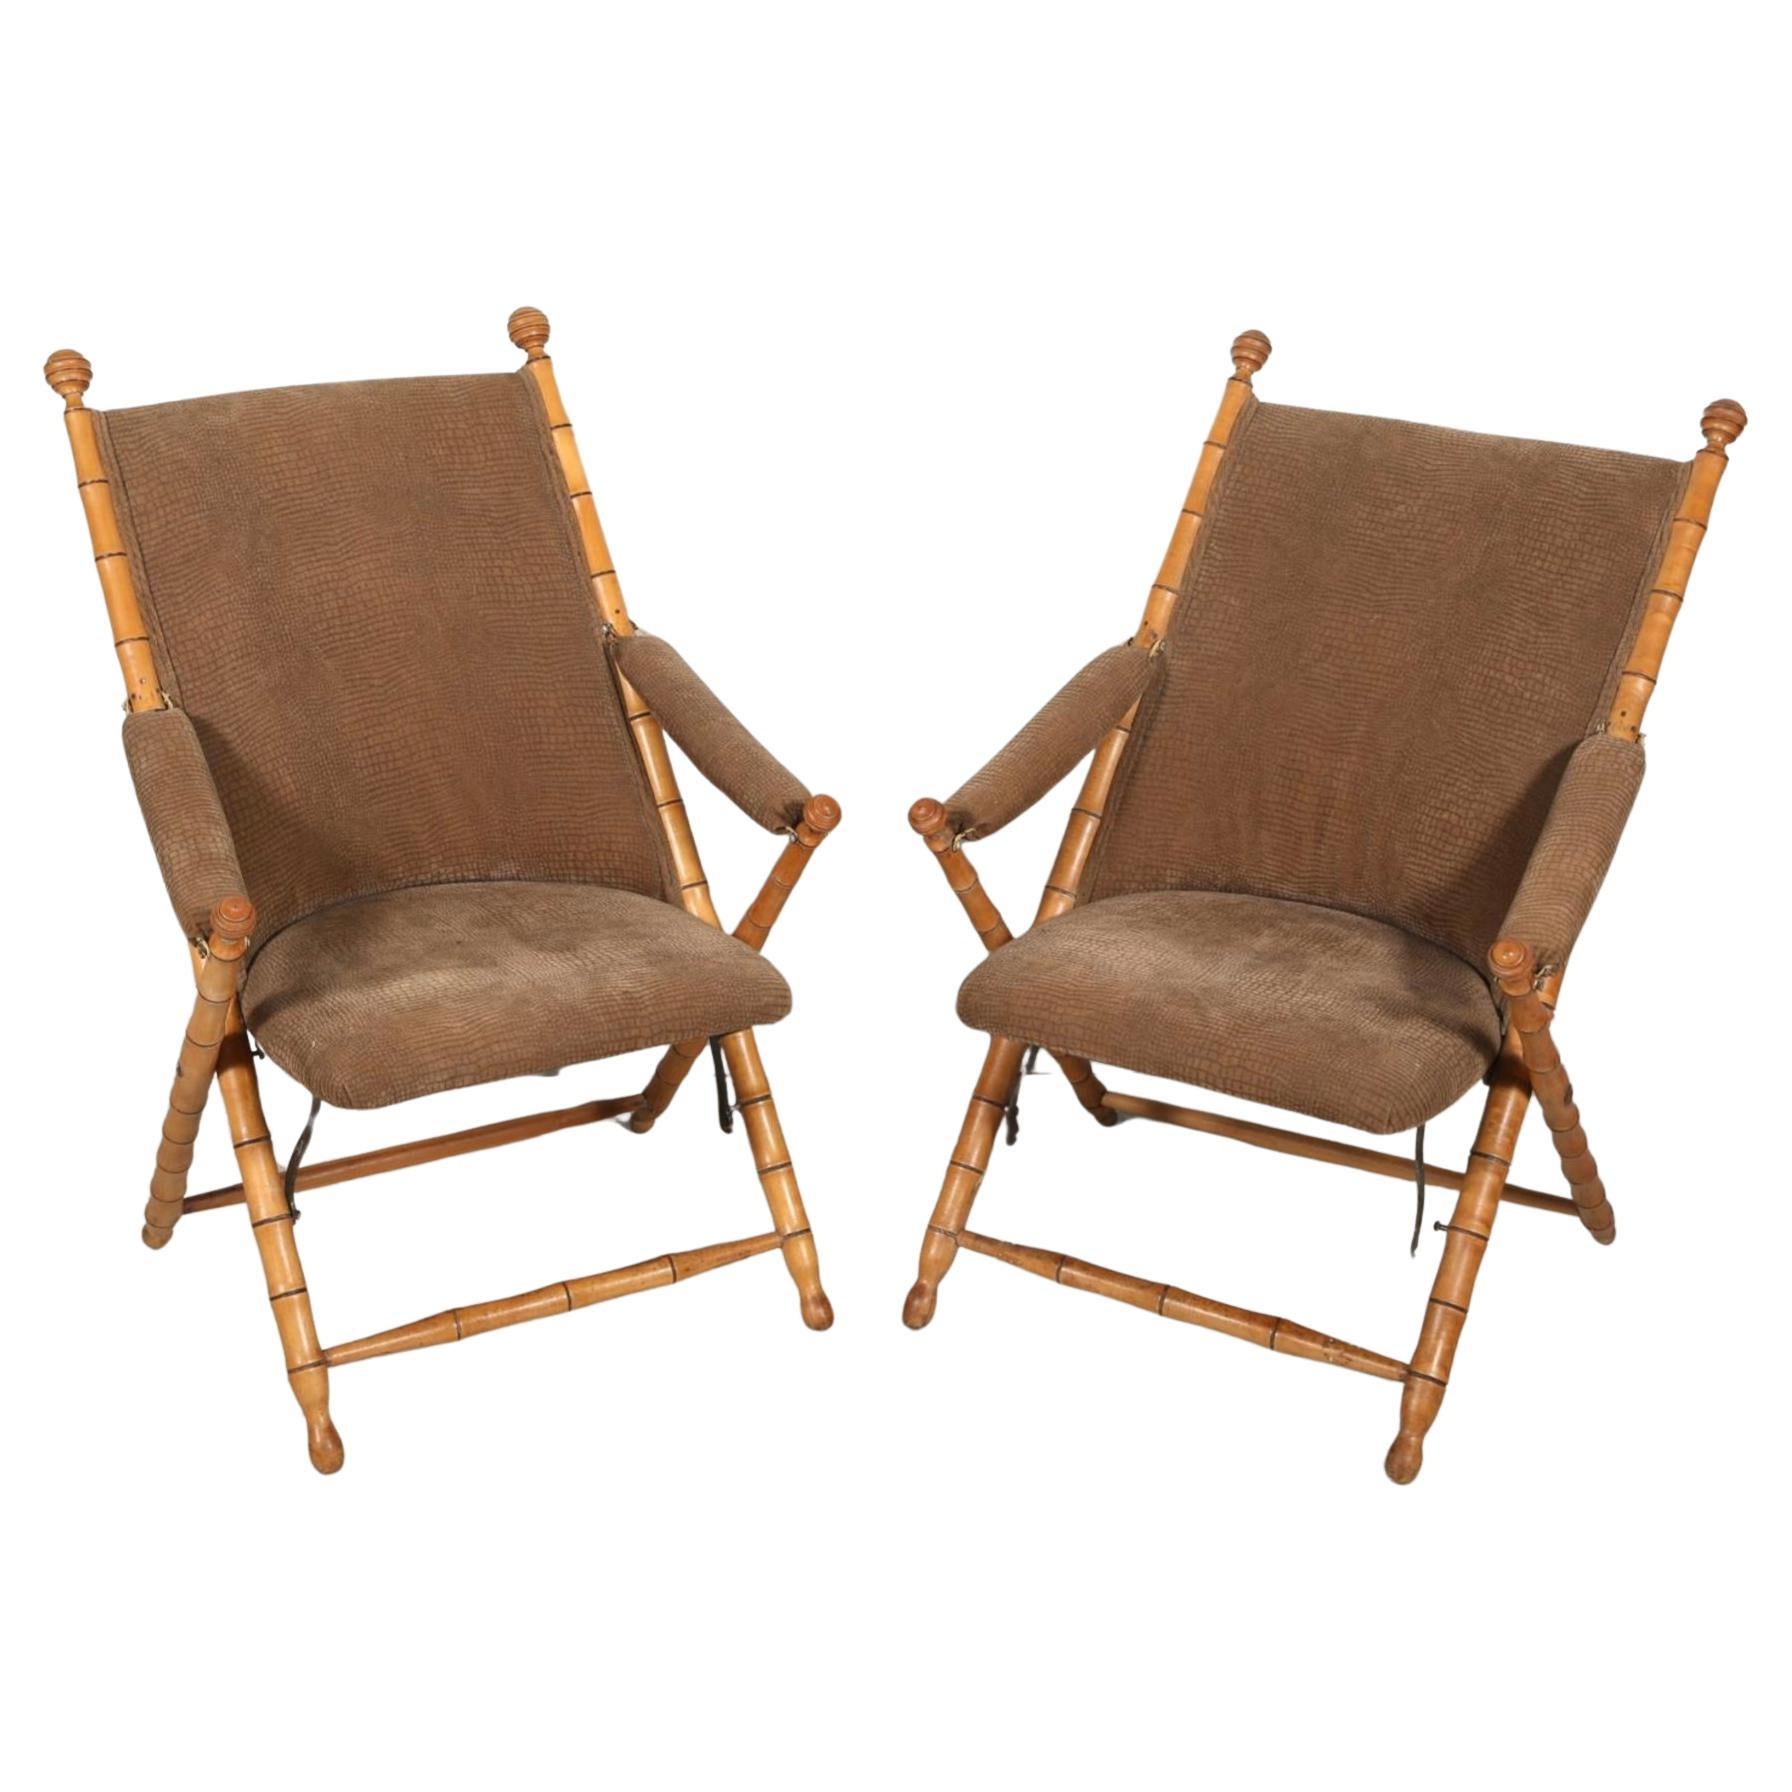  Pair of Antique Faux Bamboo Folding Campaign Lounge Chairs For Sale